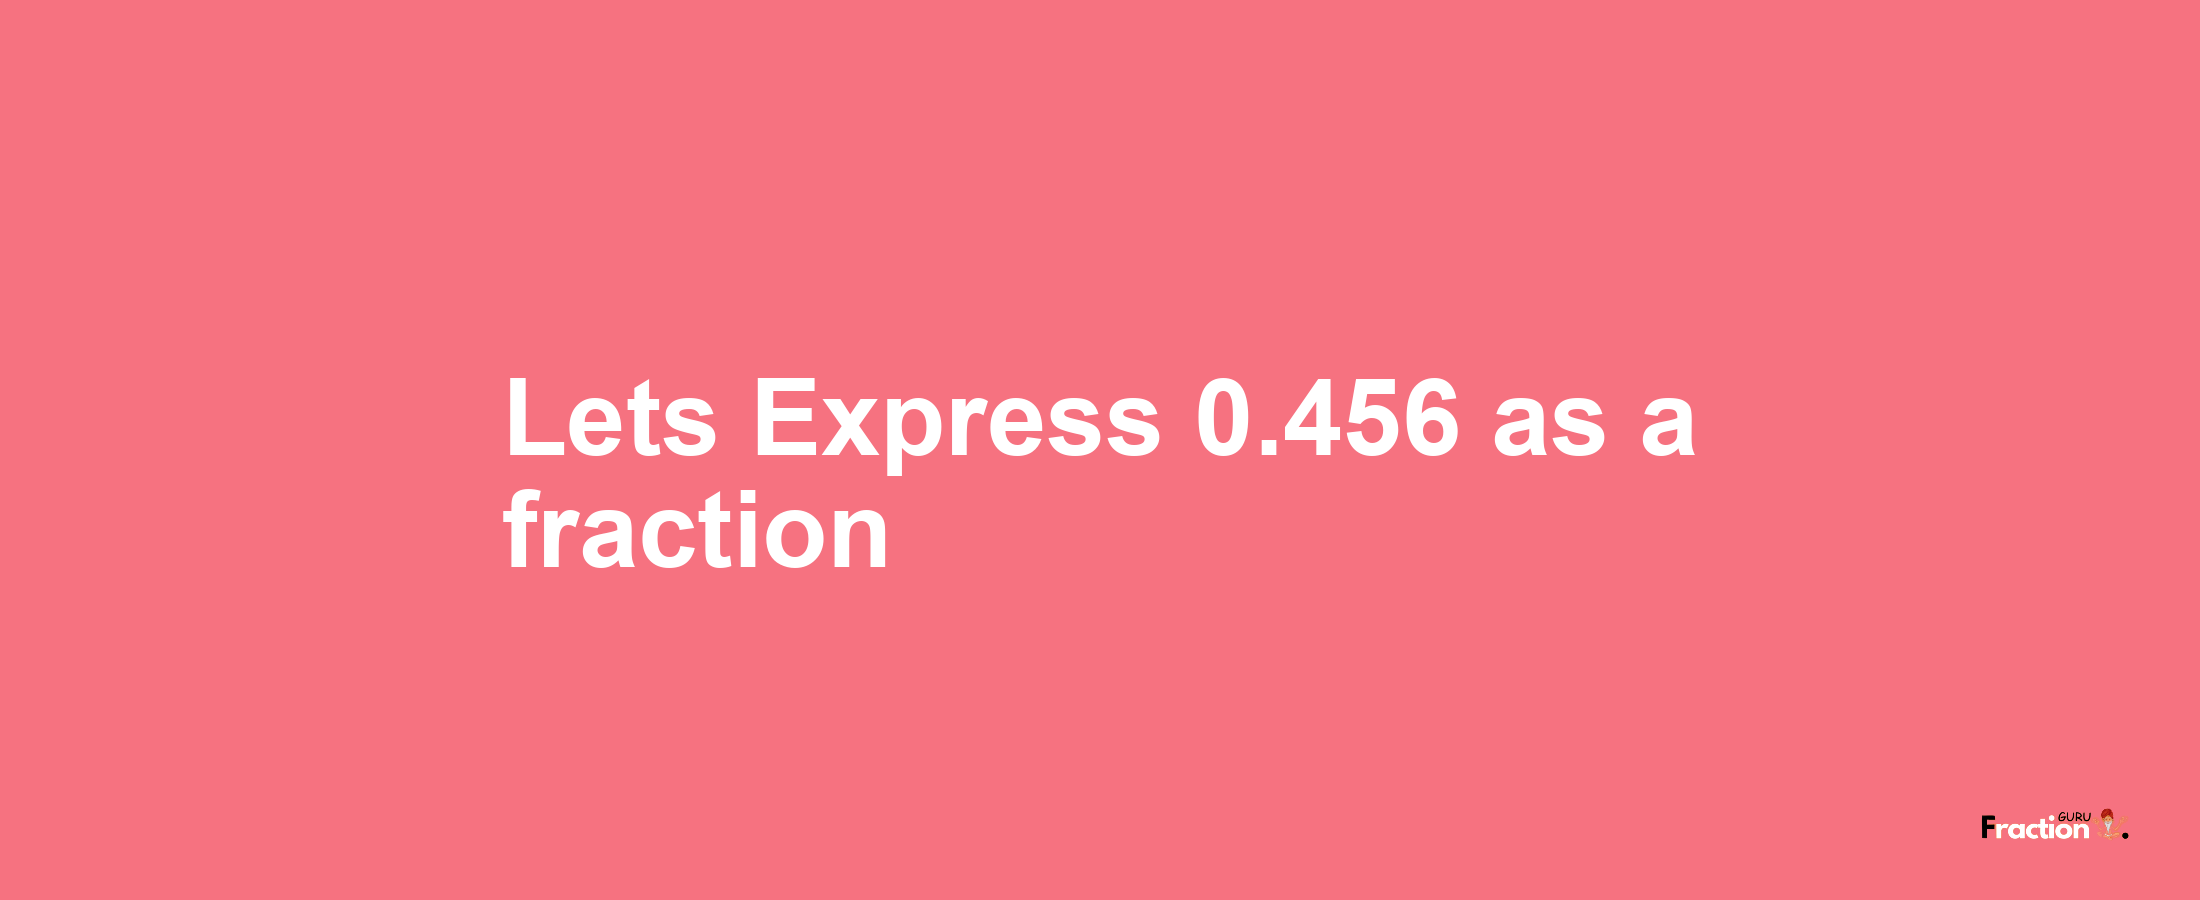 Lets Express 0.456 as afraction